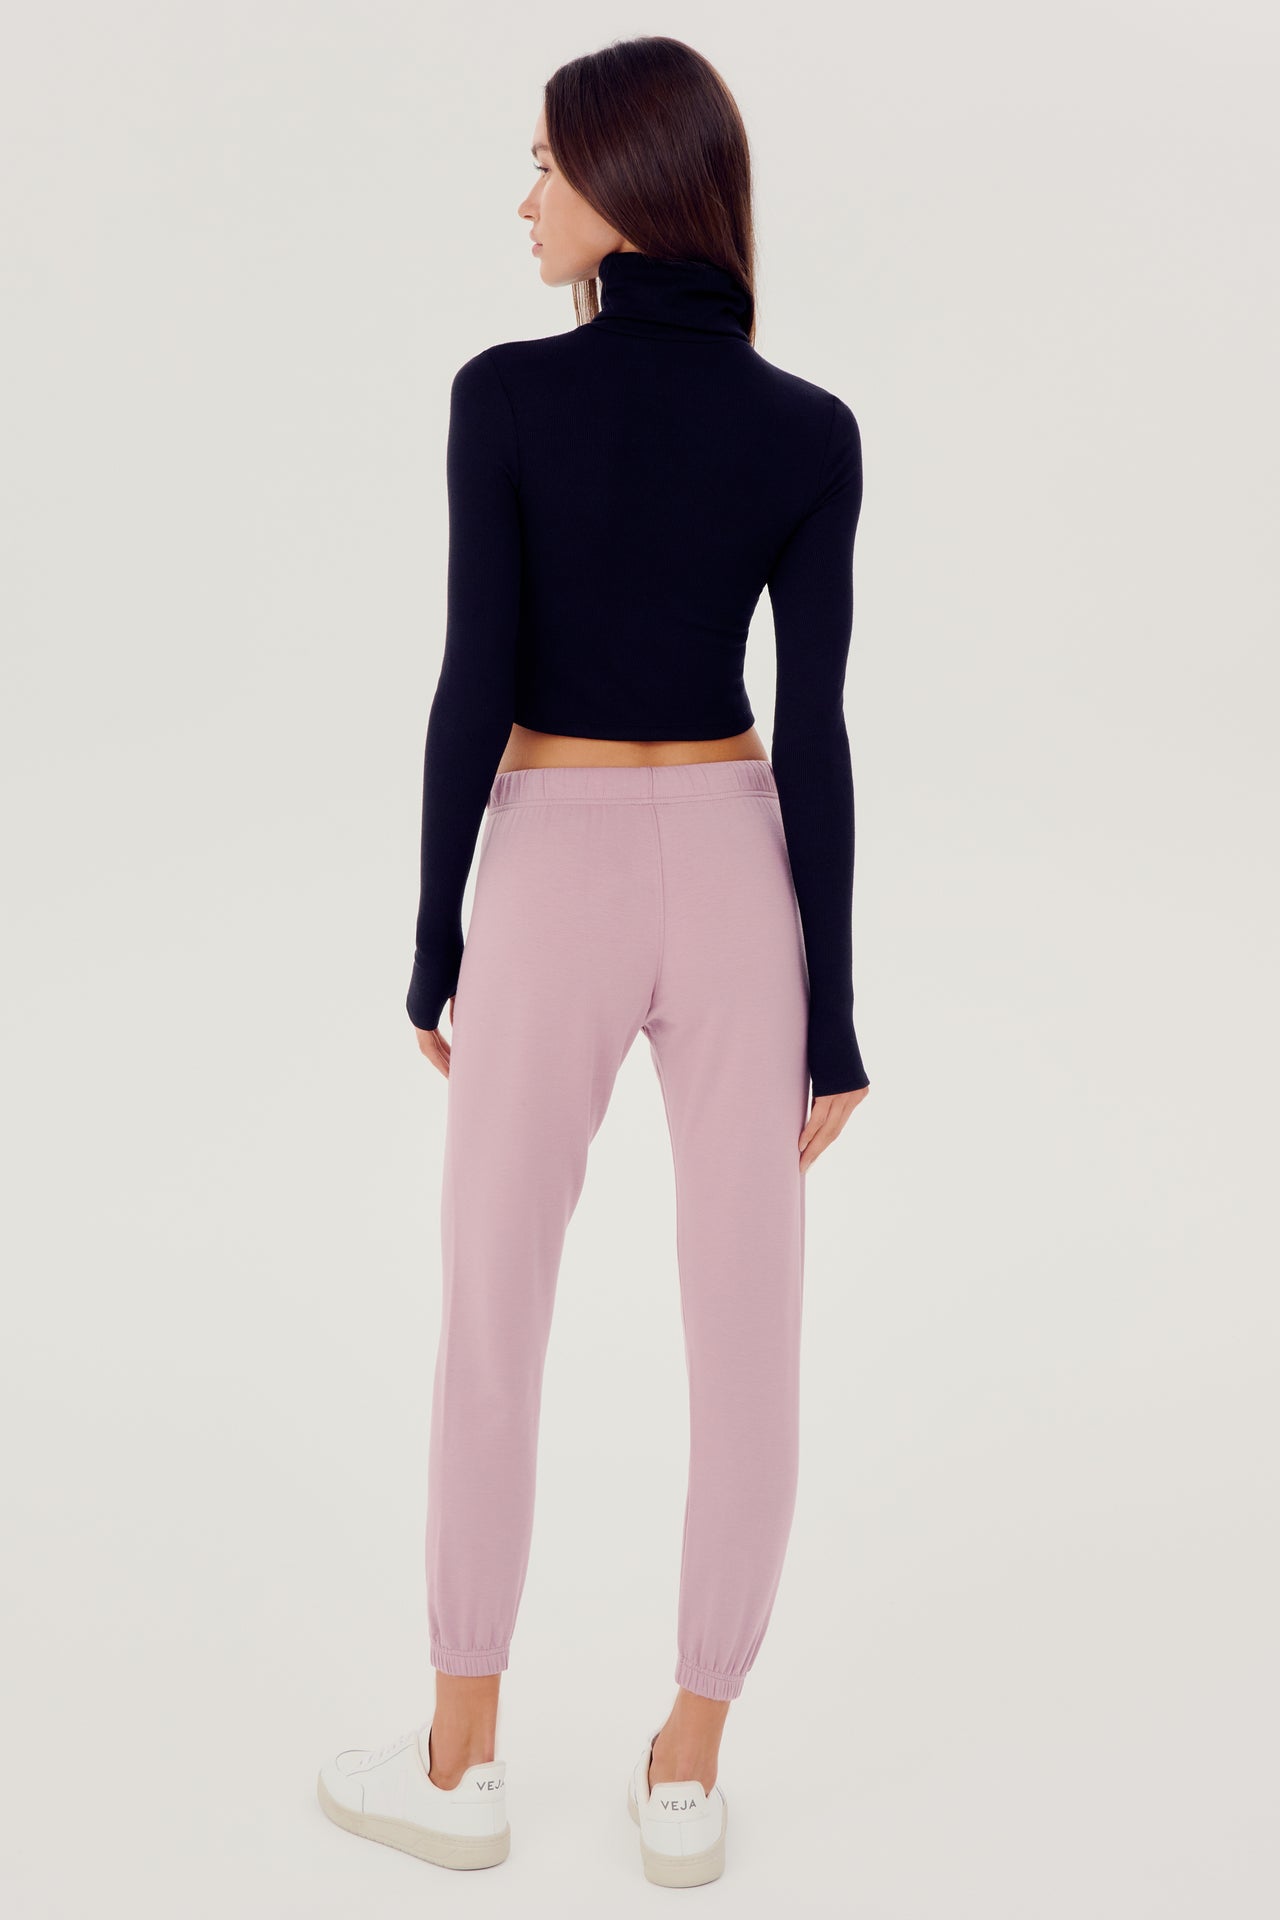 Full back view of woman with dark straight hair wearing light pink sweatpant jogger with white drawstring and black turtleneck cropped long sleeve paired with white shoes